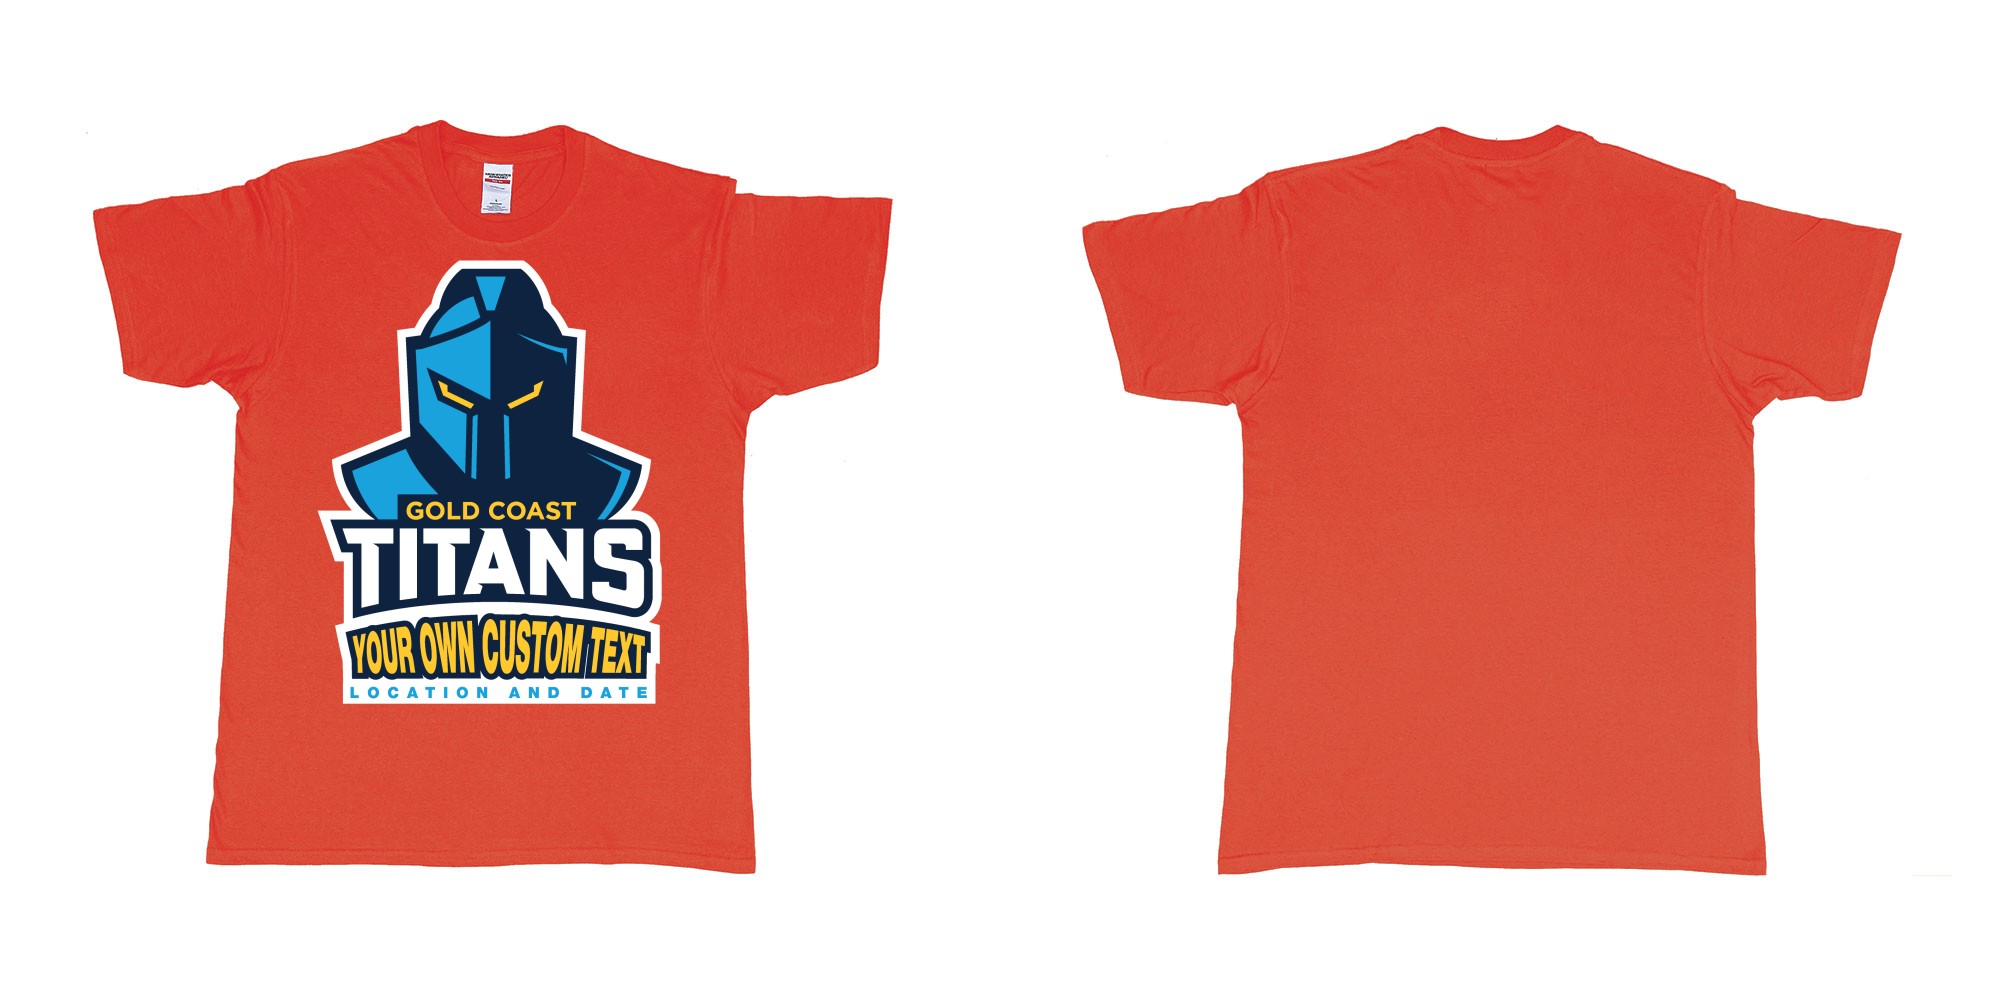 Custom tshirt design gold coast titans own custom design print in fabric color red choice your own text made in Bali by The Pirate Way